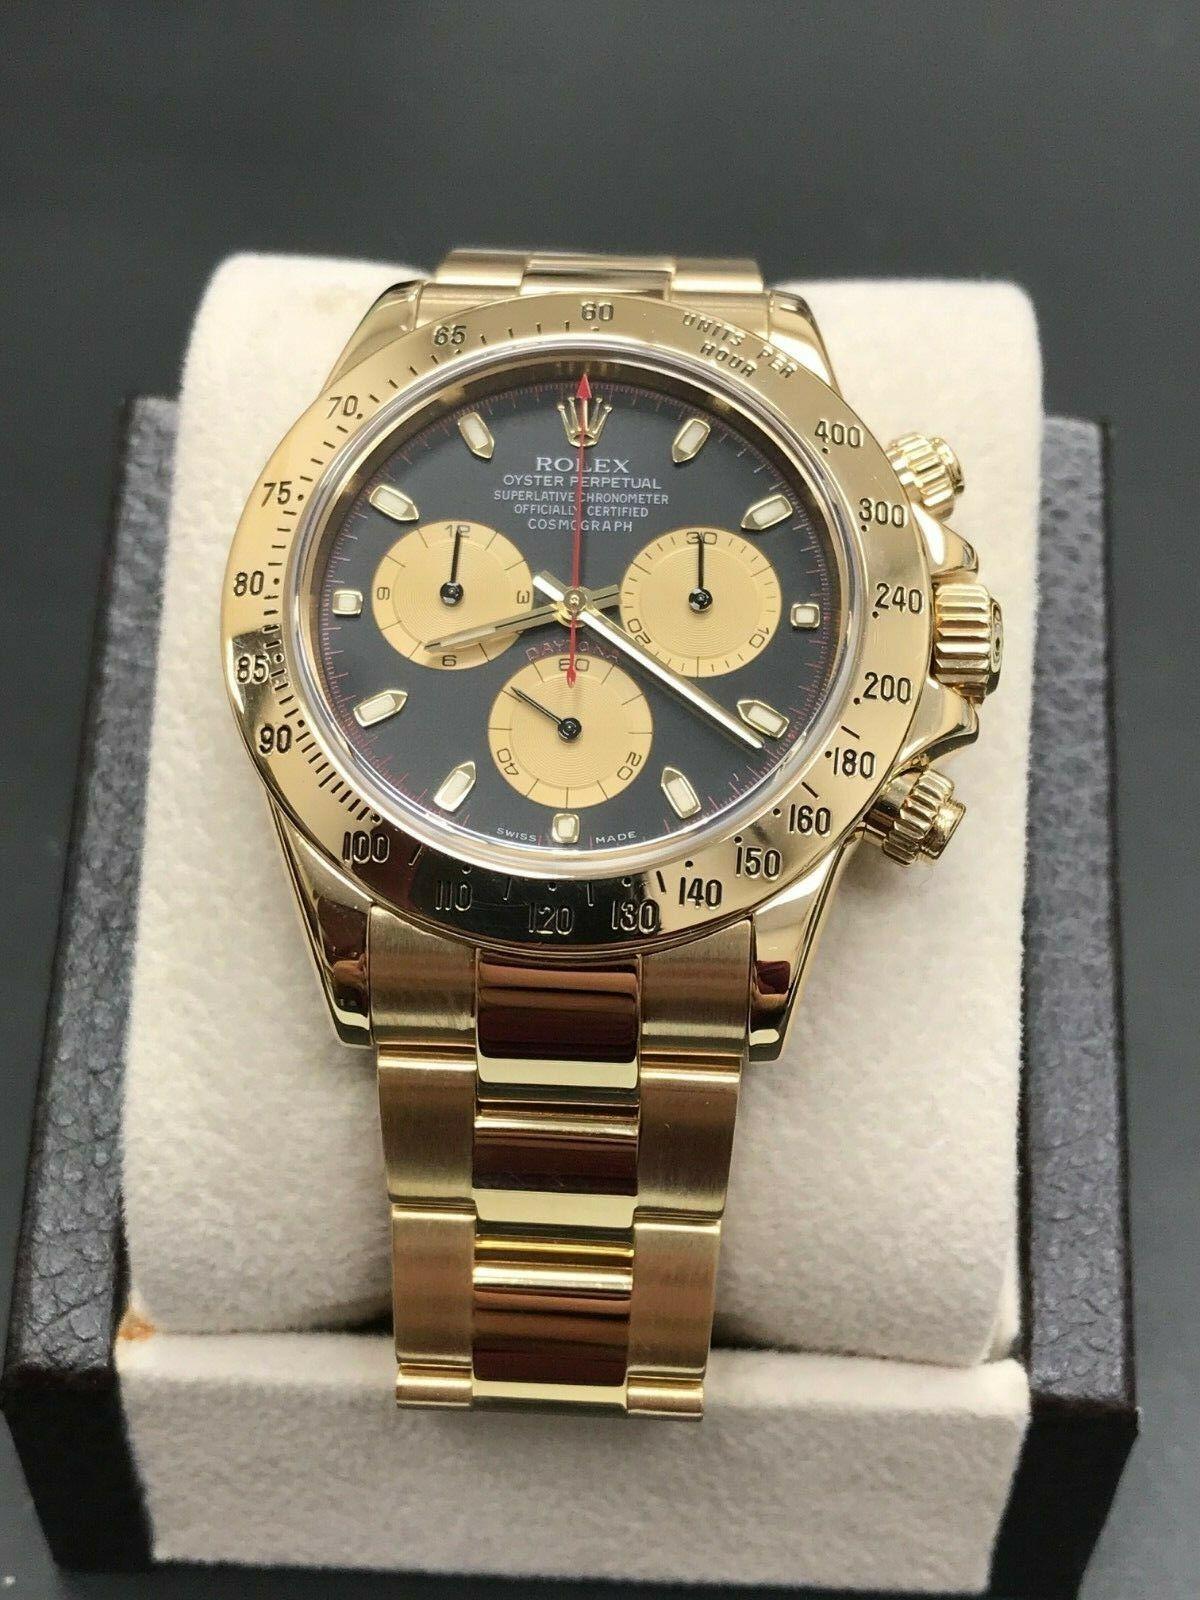 Style Number: 116528
Serial: Y237***
Year: 2002
Model: Daytona
Case Material: 18K Yellow Gold
Band: 18K Yellow Gold
Bezel: 18K Yellow Gold
Dial: Black
Face: Sapphire Crystal 
Case Size: 40mm
Includes: 
-Rolex Box 
-Certified Appraisal 
-1 Year